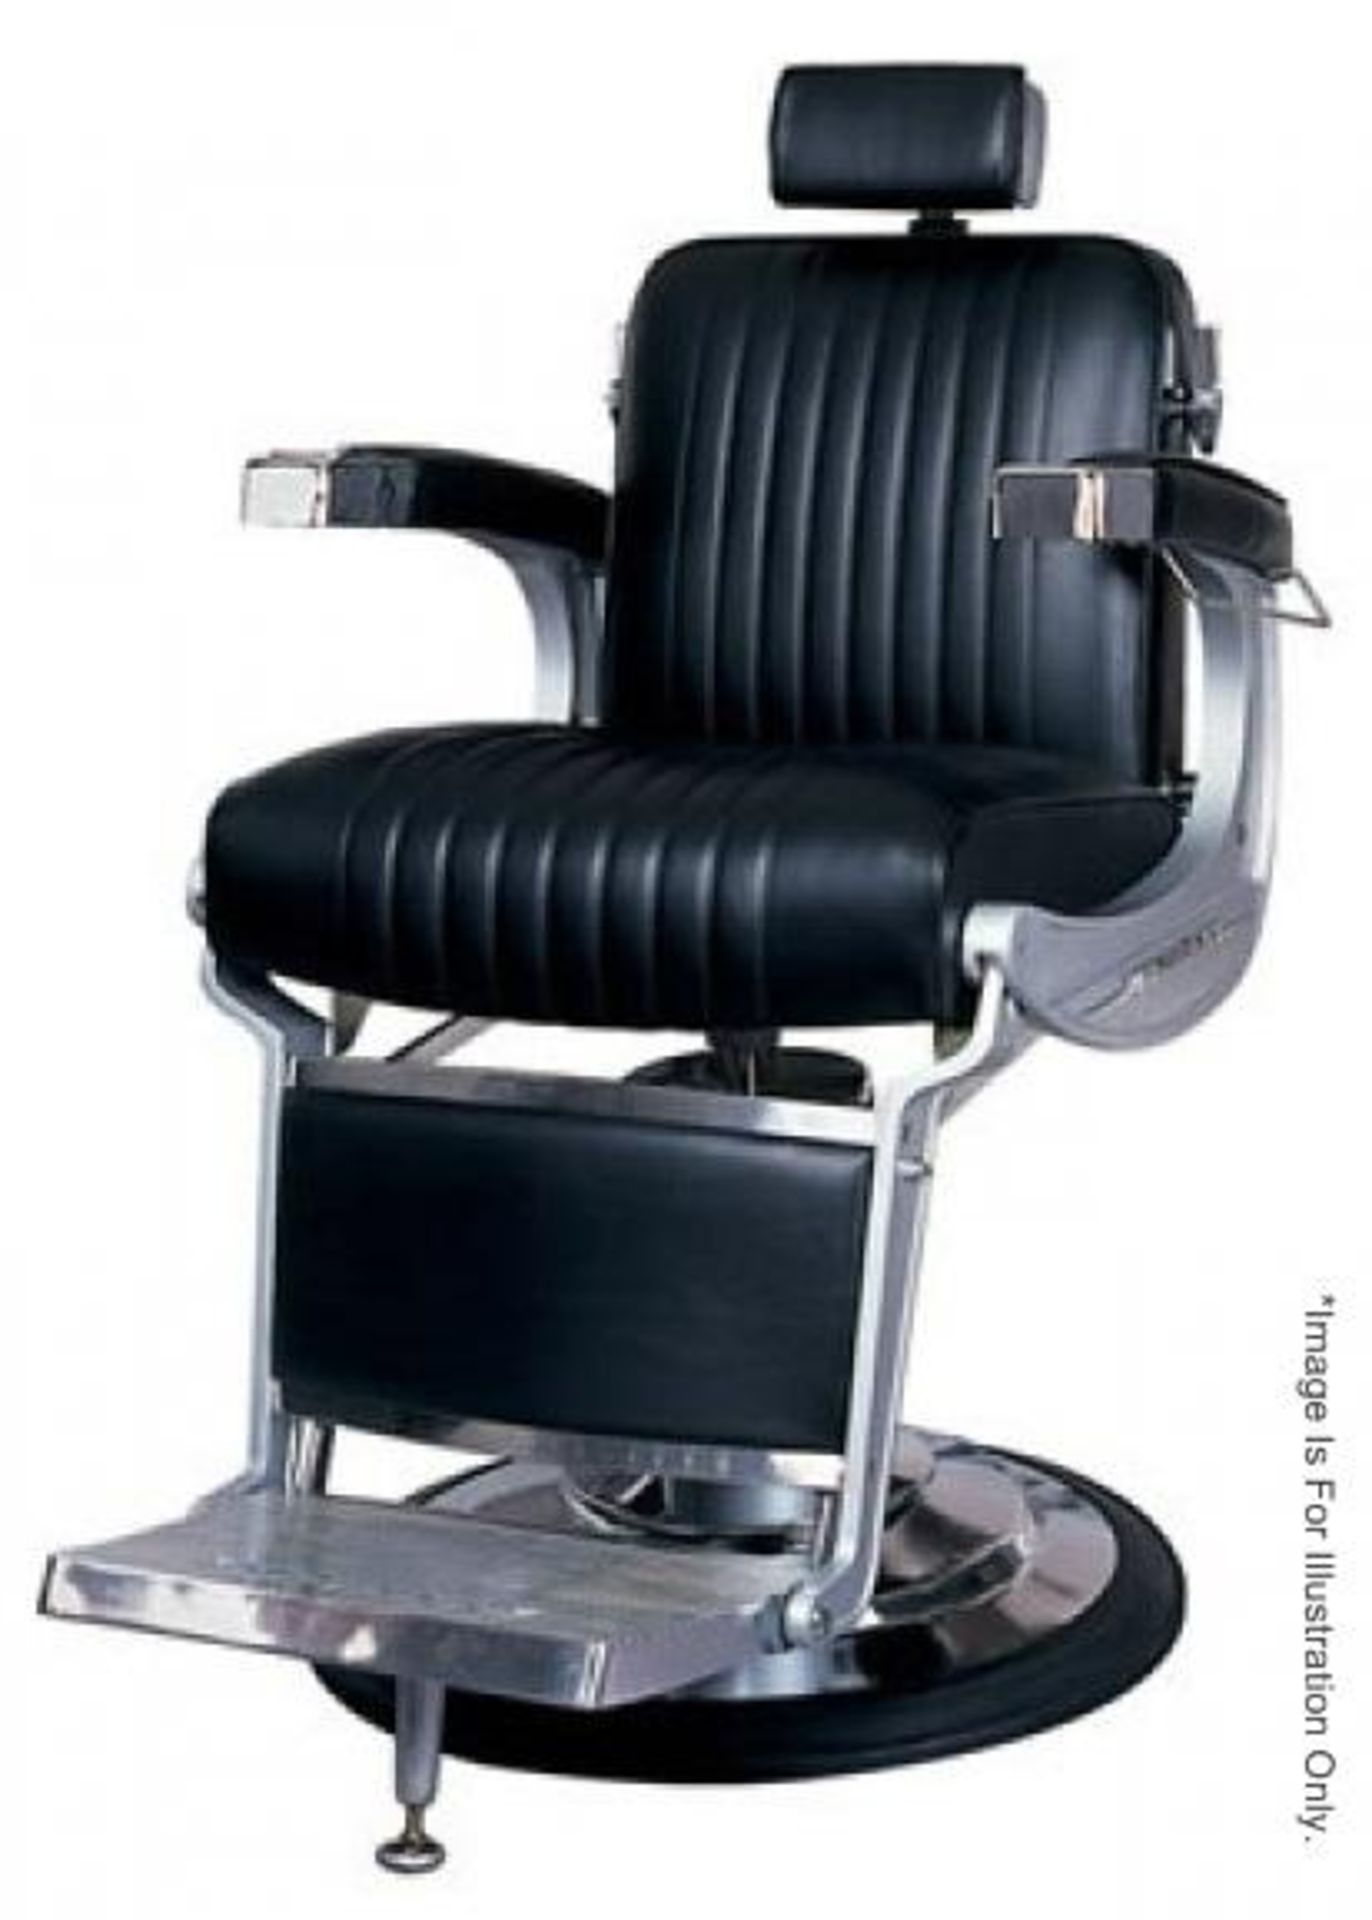 1 x Takara BELMONT "Apollo 2" Barbers Chair - Recently Taken From A Premier West-End Male Grooming S